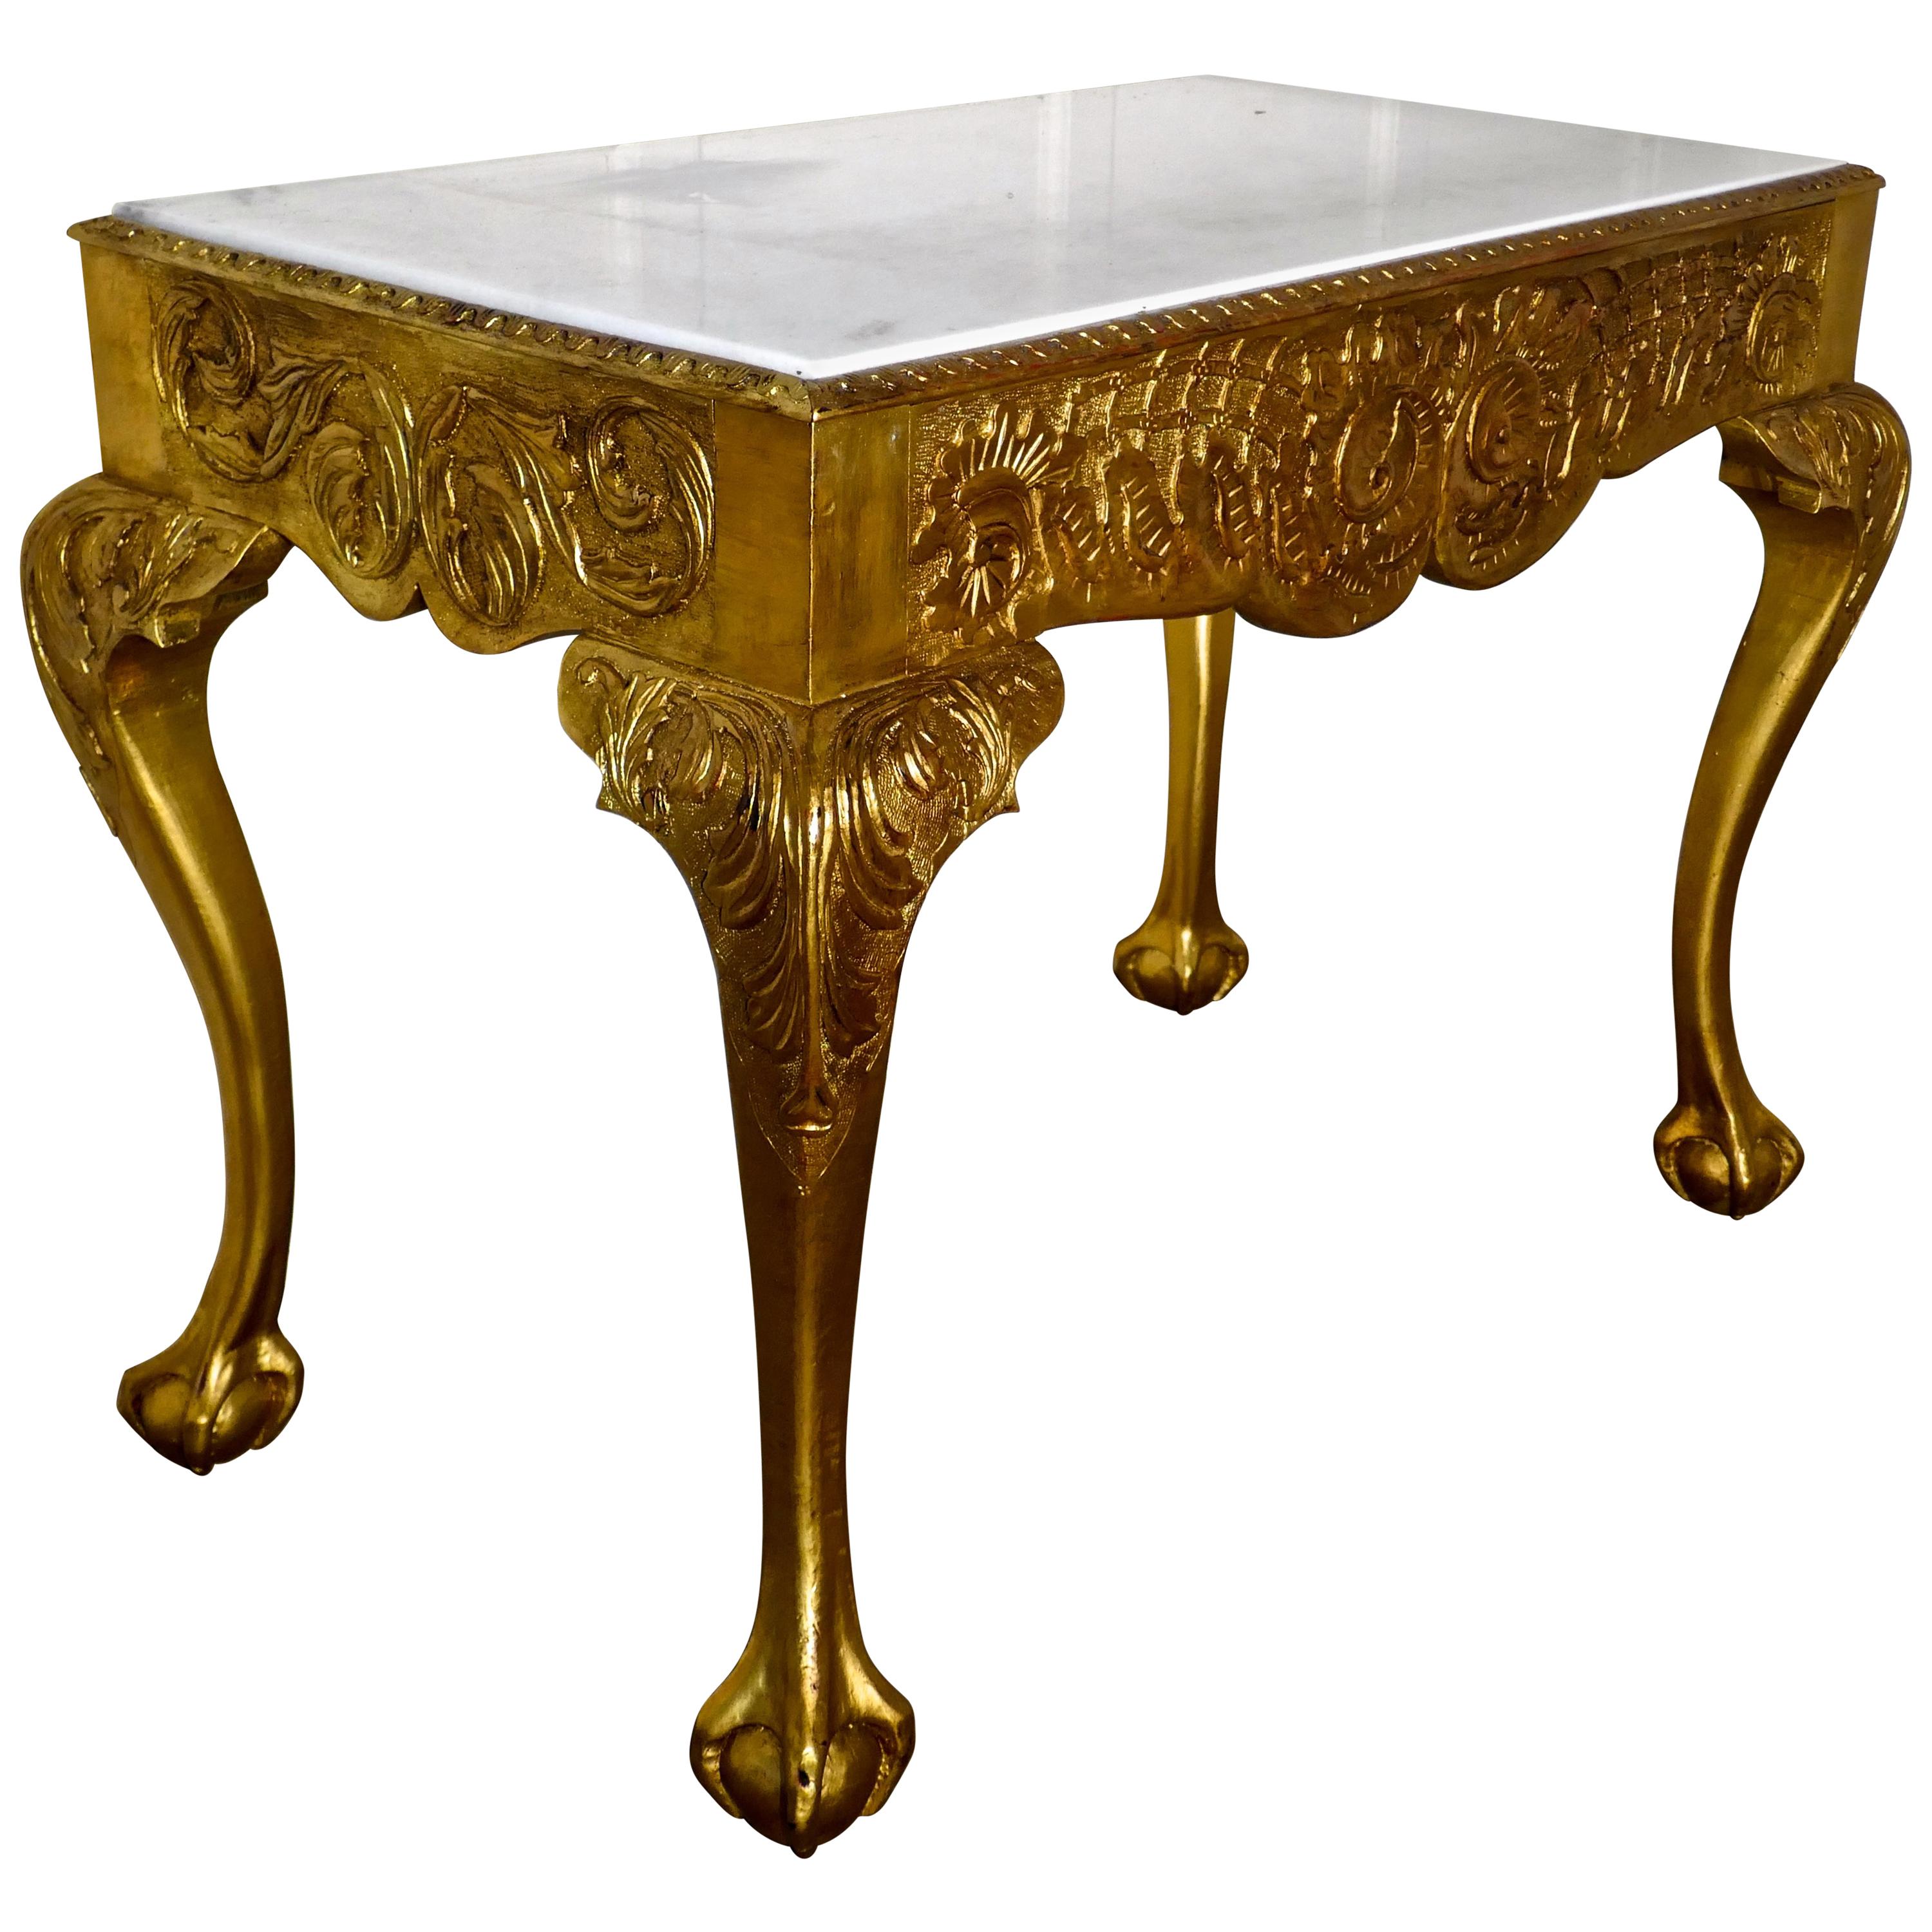 19th Century French Marble-Top Gilt Console or Hall Table